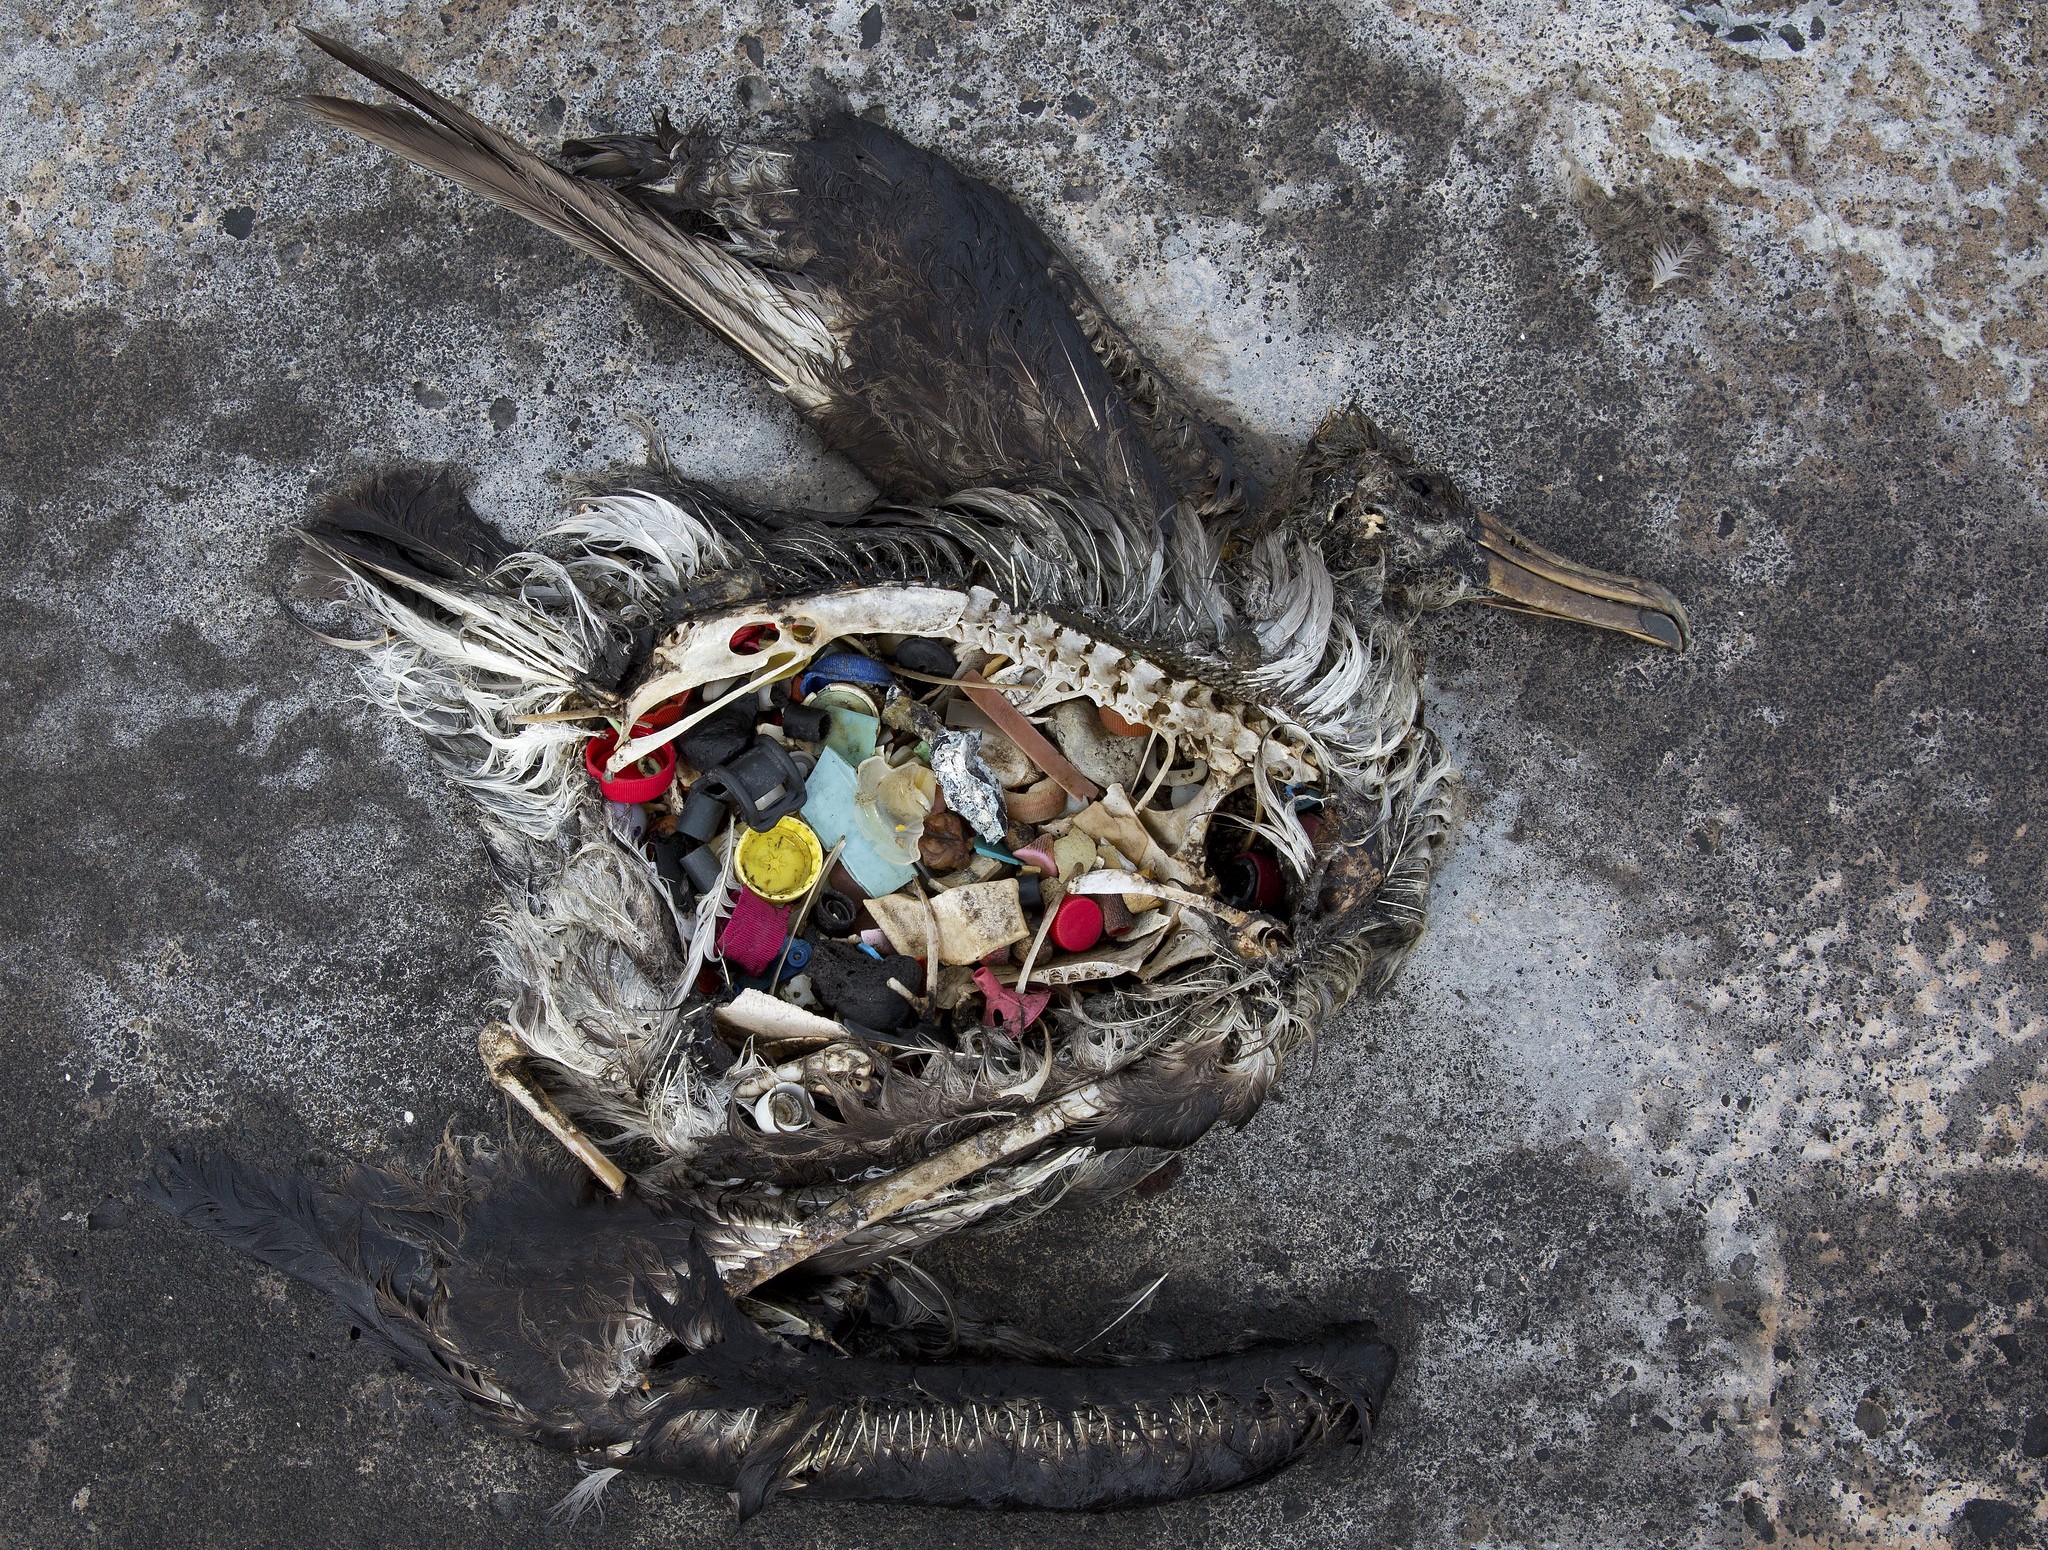 Dead albatross filled with plastic debris from pollution